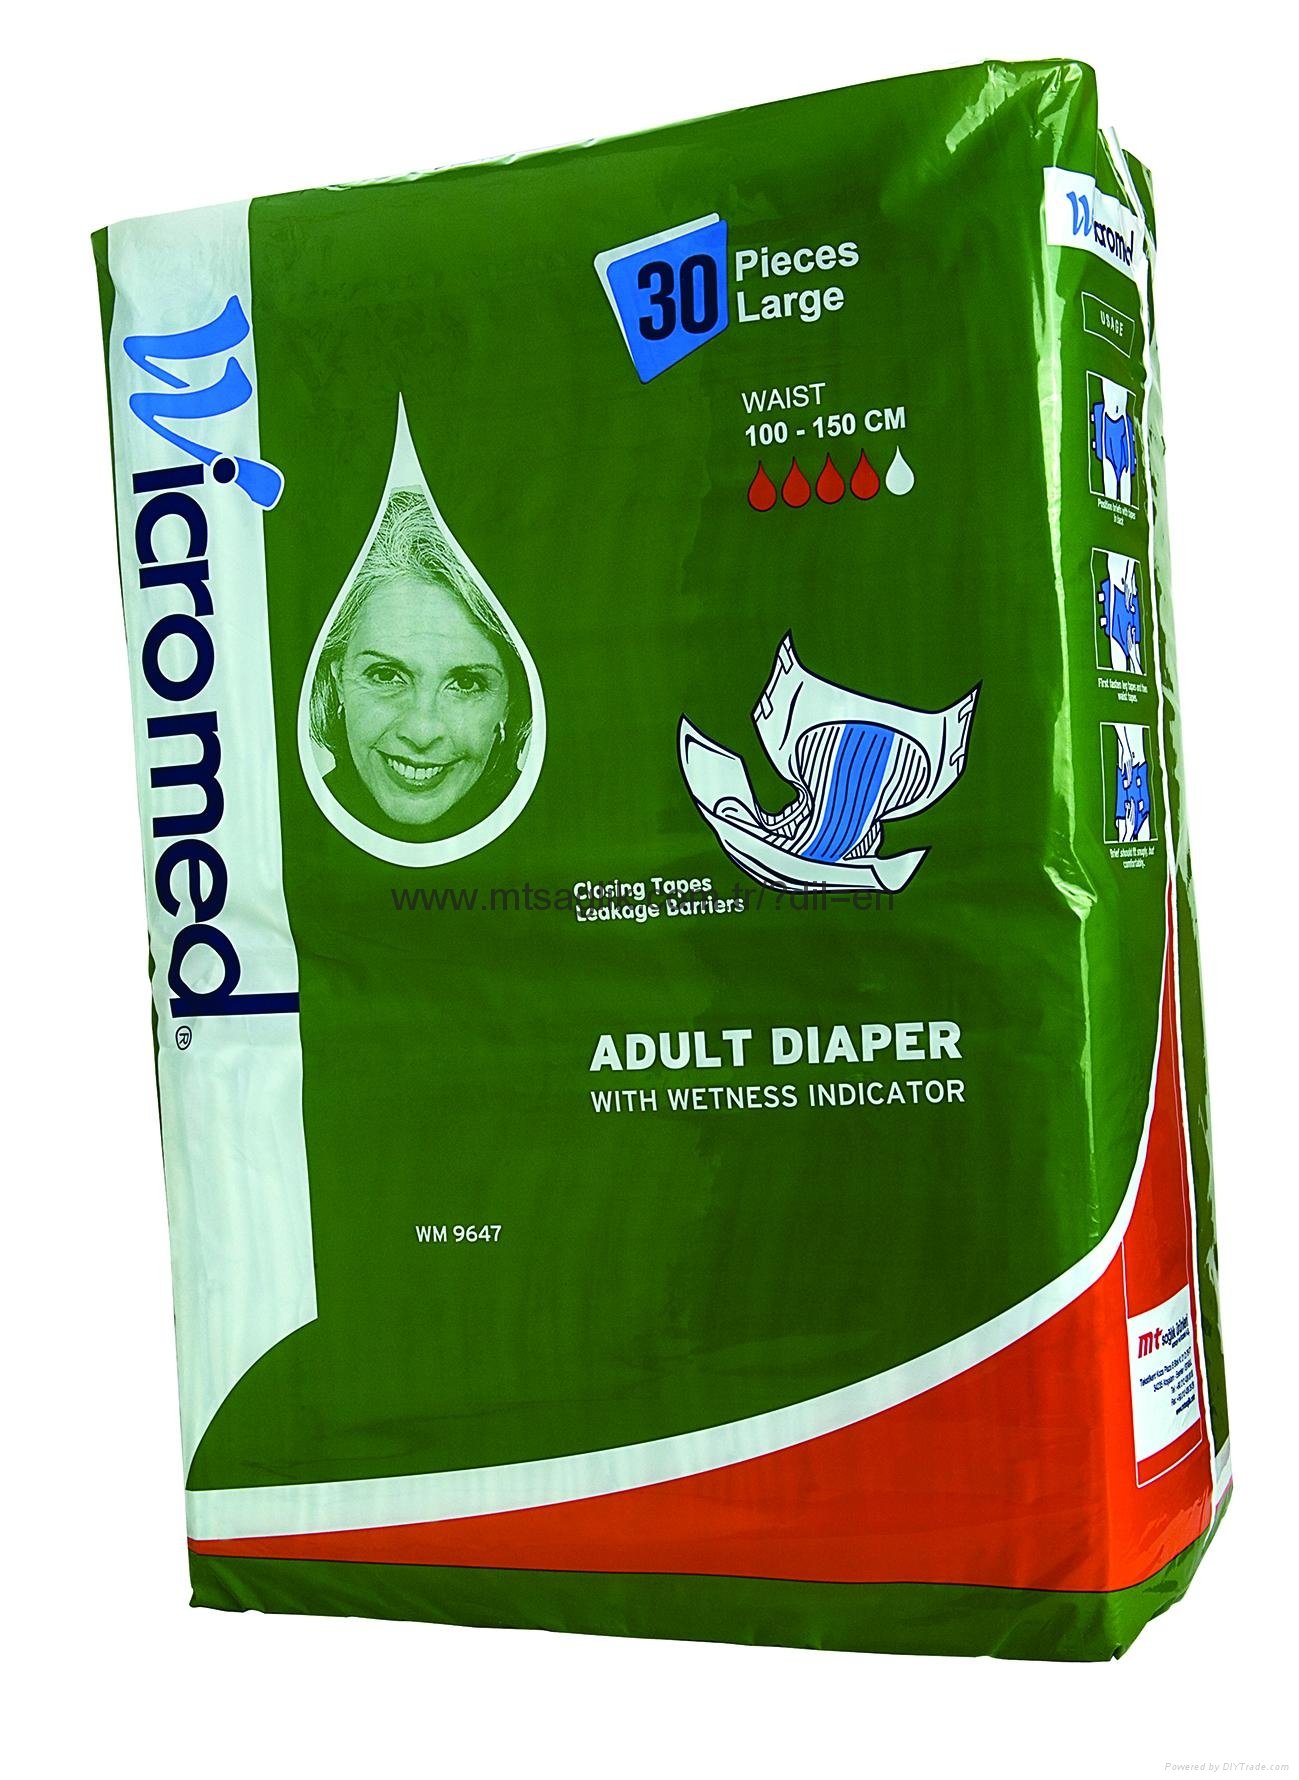 Adult Diapers 4